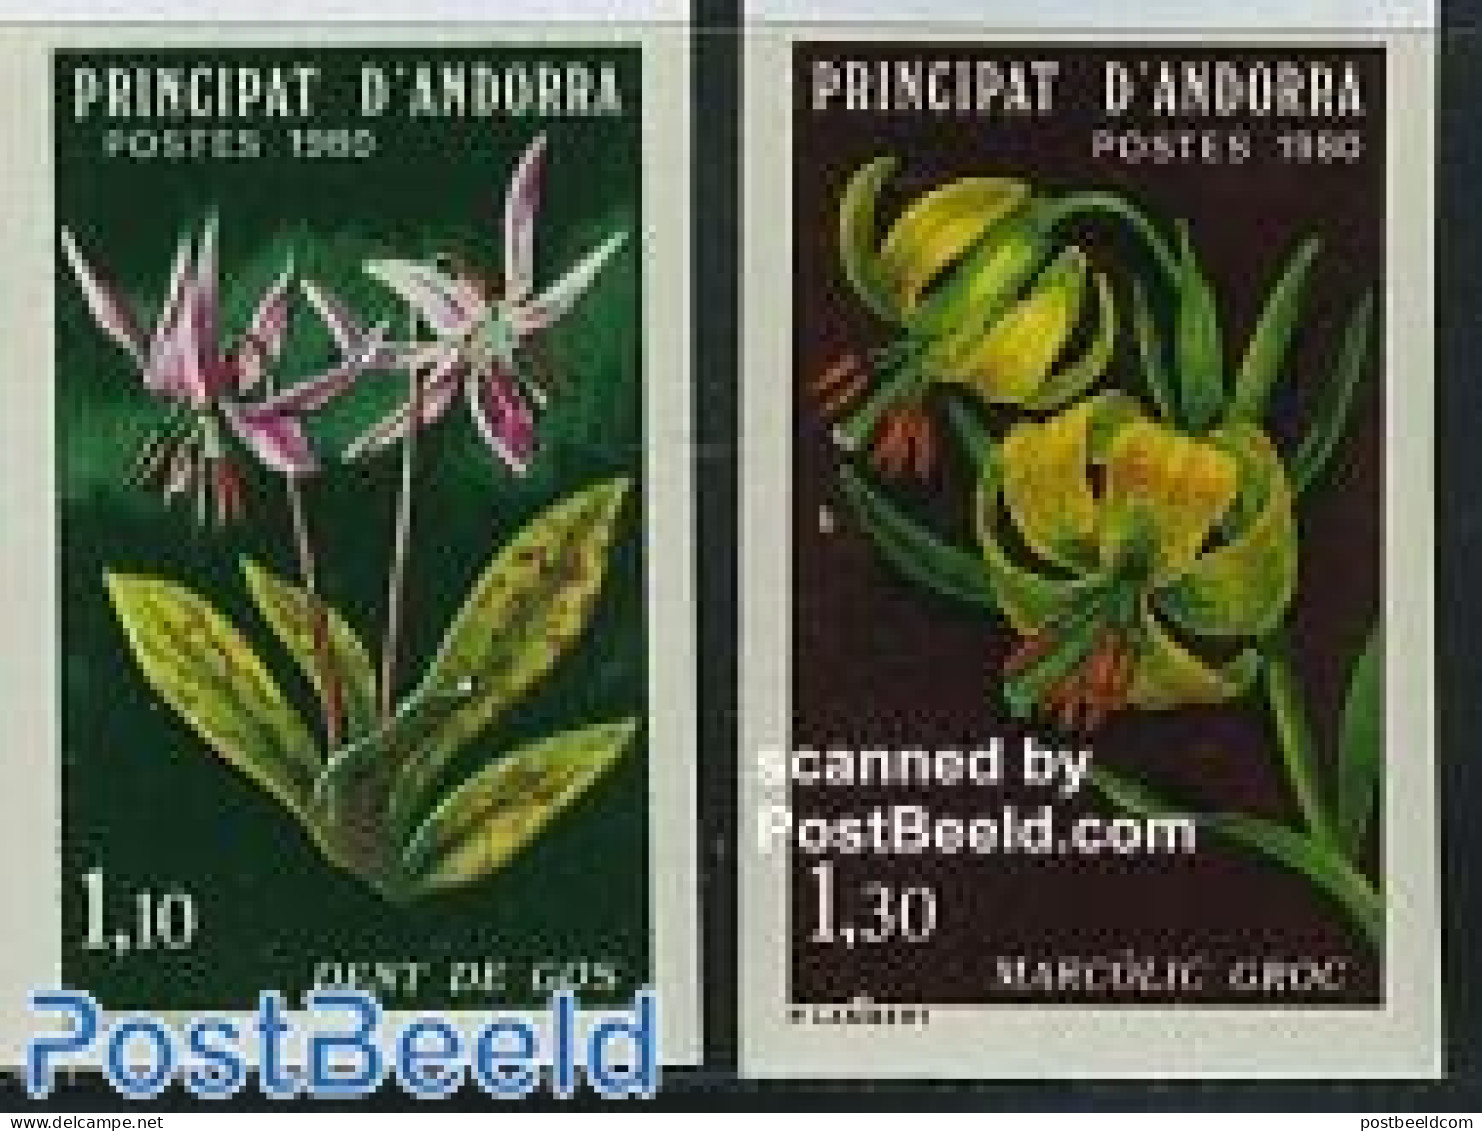 Andorra, French Post 1980 Flowers 2v Imperforated, Mint NH, Nature - Flowers & Plants - Unused Stamps